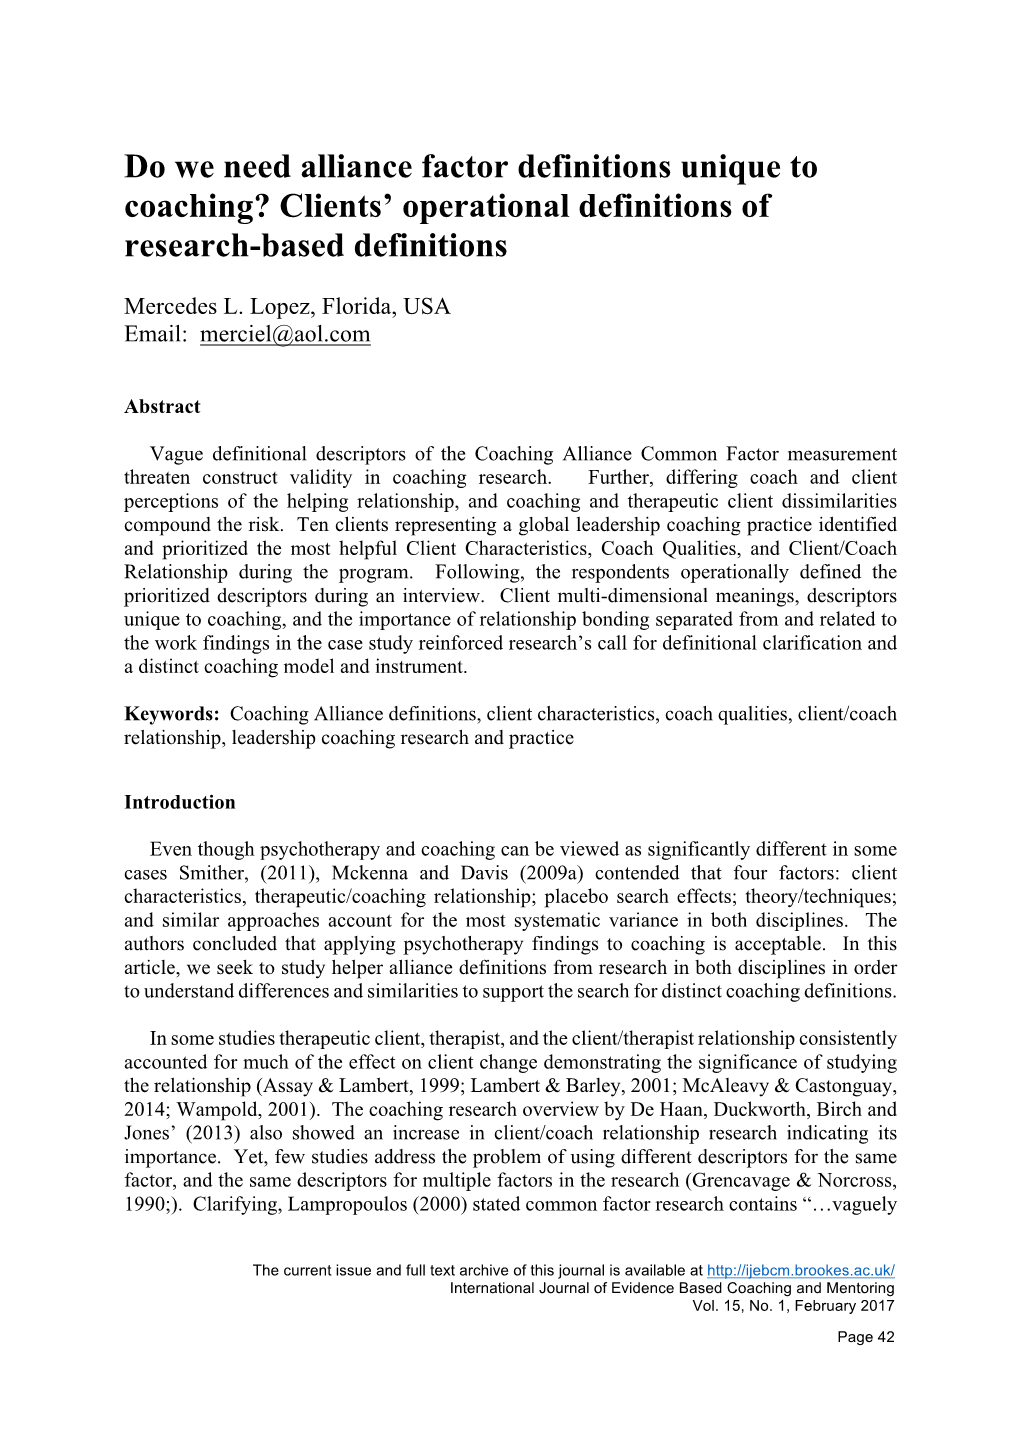 Do We Need Alliance Factor Definitions Unique to Coaching? Clients’ Operational Definitions of Research-Based Definitions